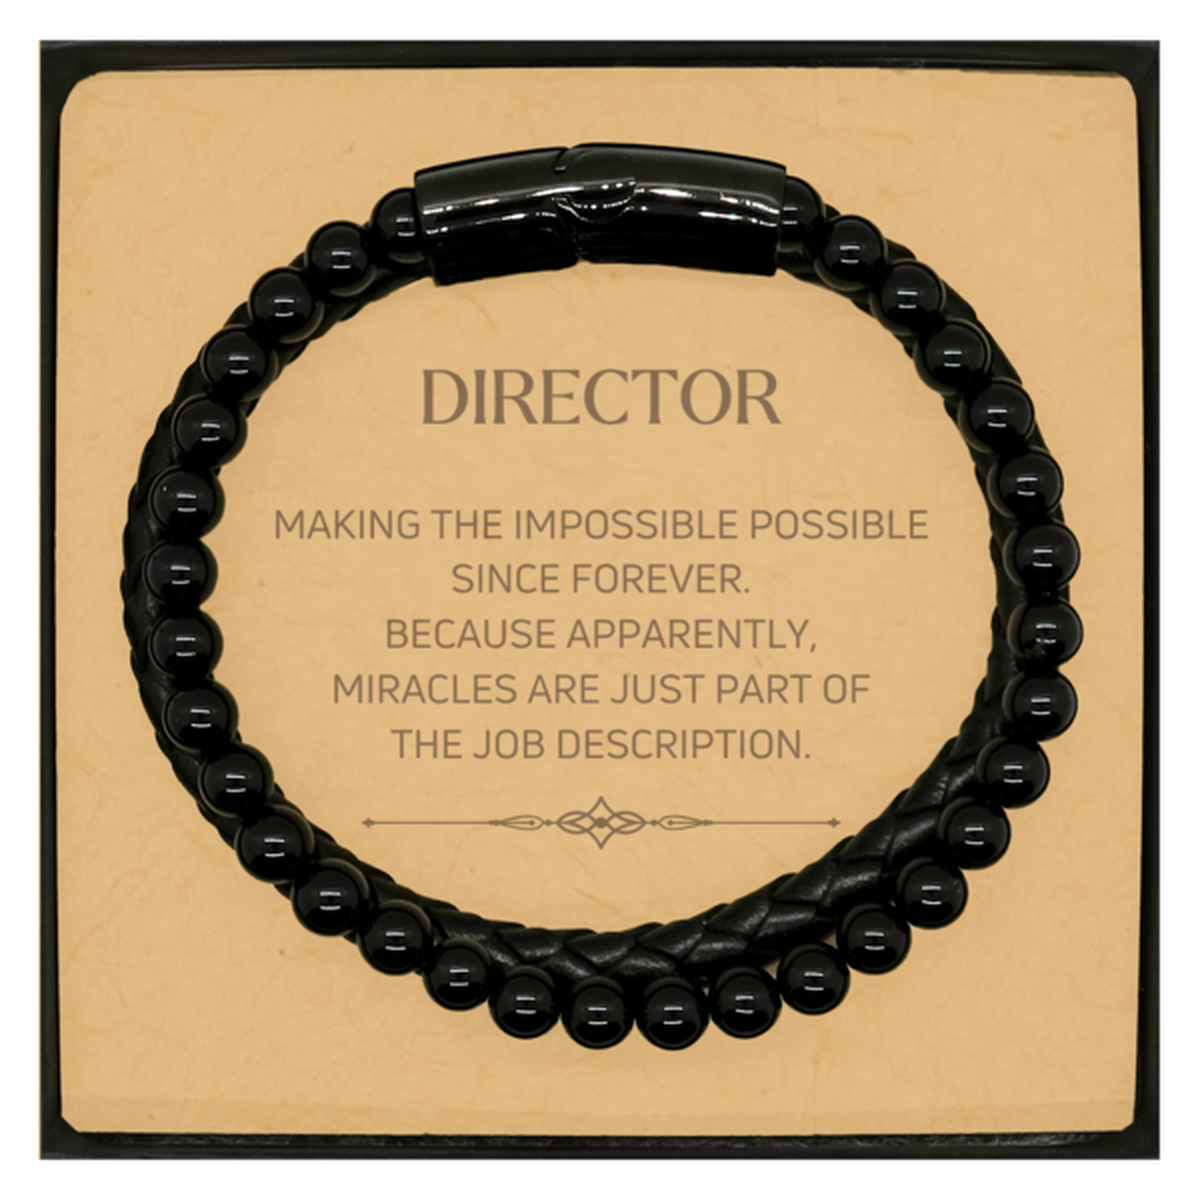 Funny Director Gifts, Miracles are just part of the job description, Inspirational Birthday Christmas Stone Leather Bracelets For Director, Men, Women, Coworkers, Friends, Boss